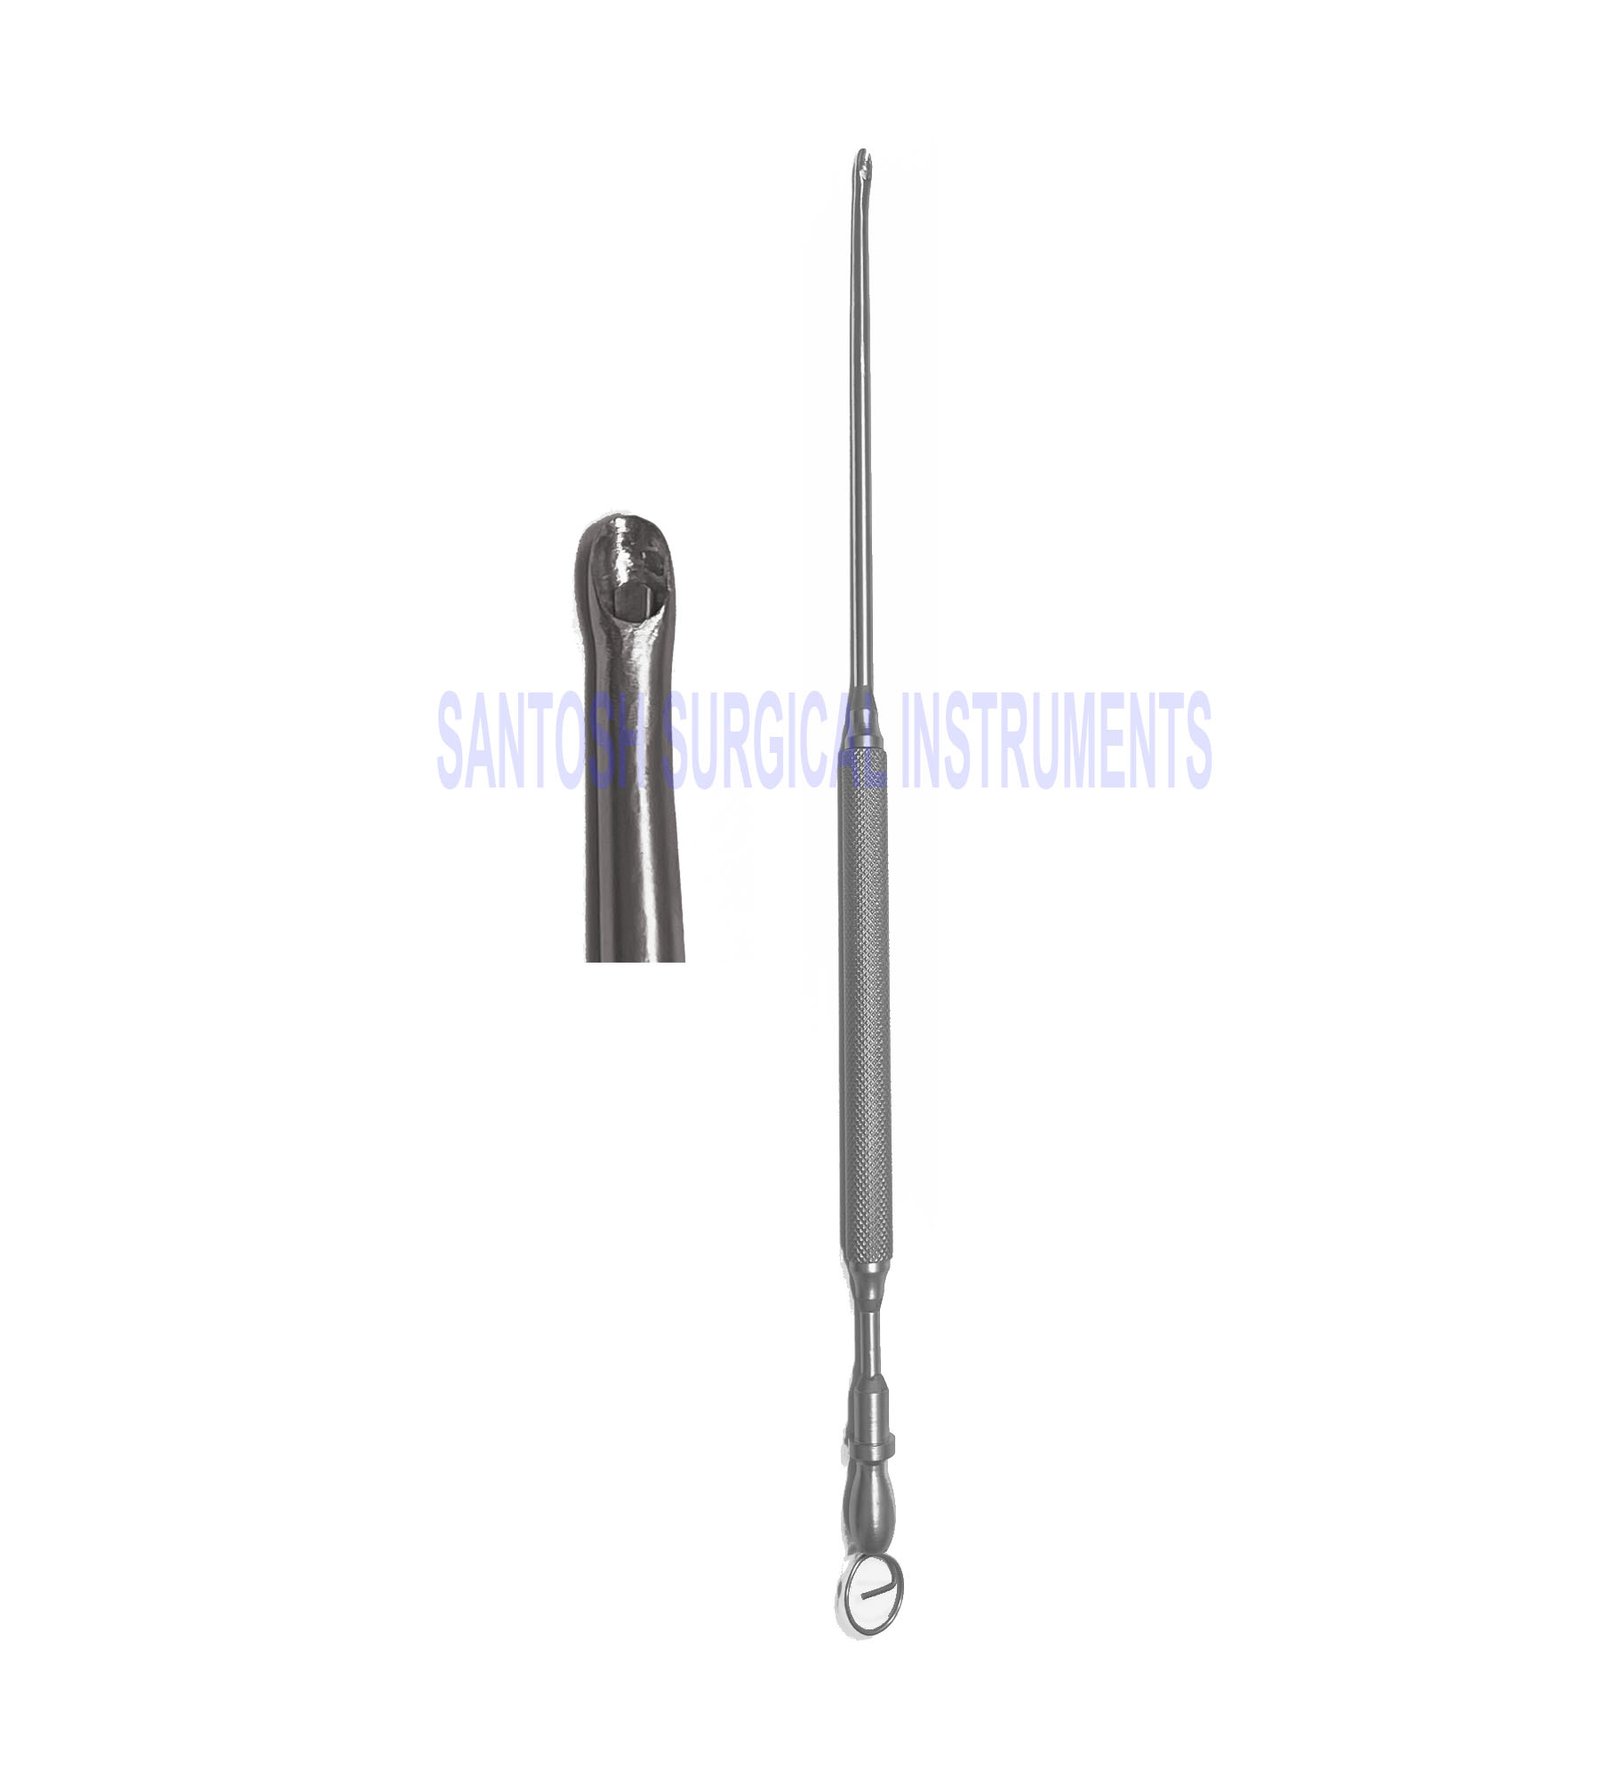 EAR VECTISE FOREIGN BODY SCOOP WITH CURETTE WITH SERRATION DOUBLE ENDED -  Santosh Surgical